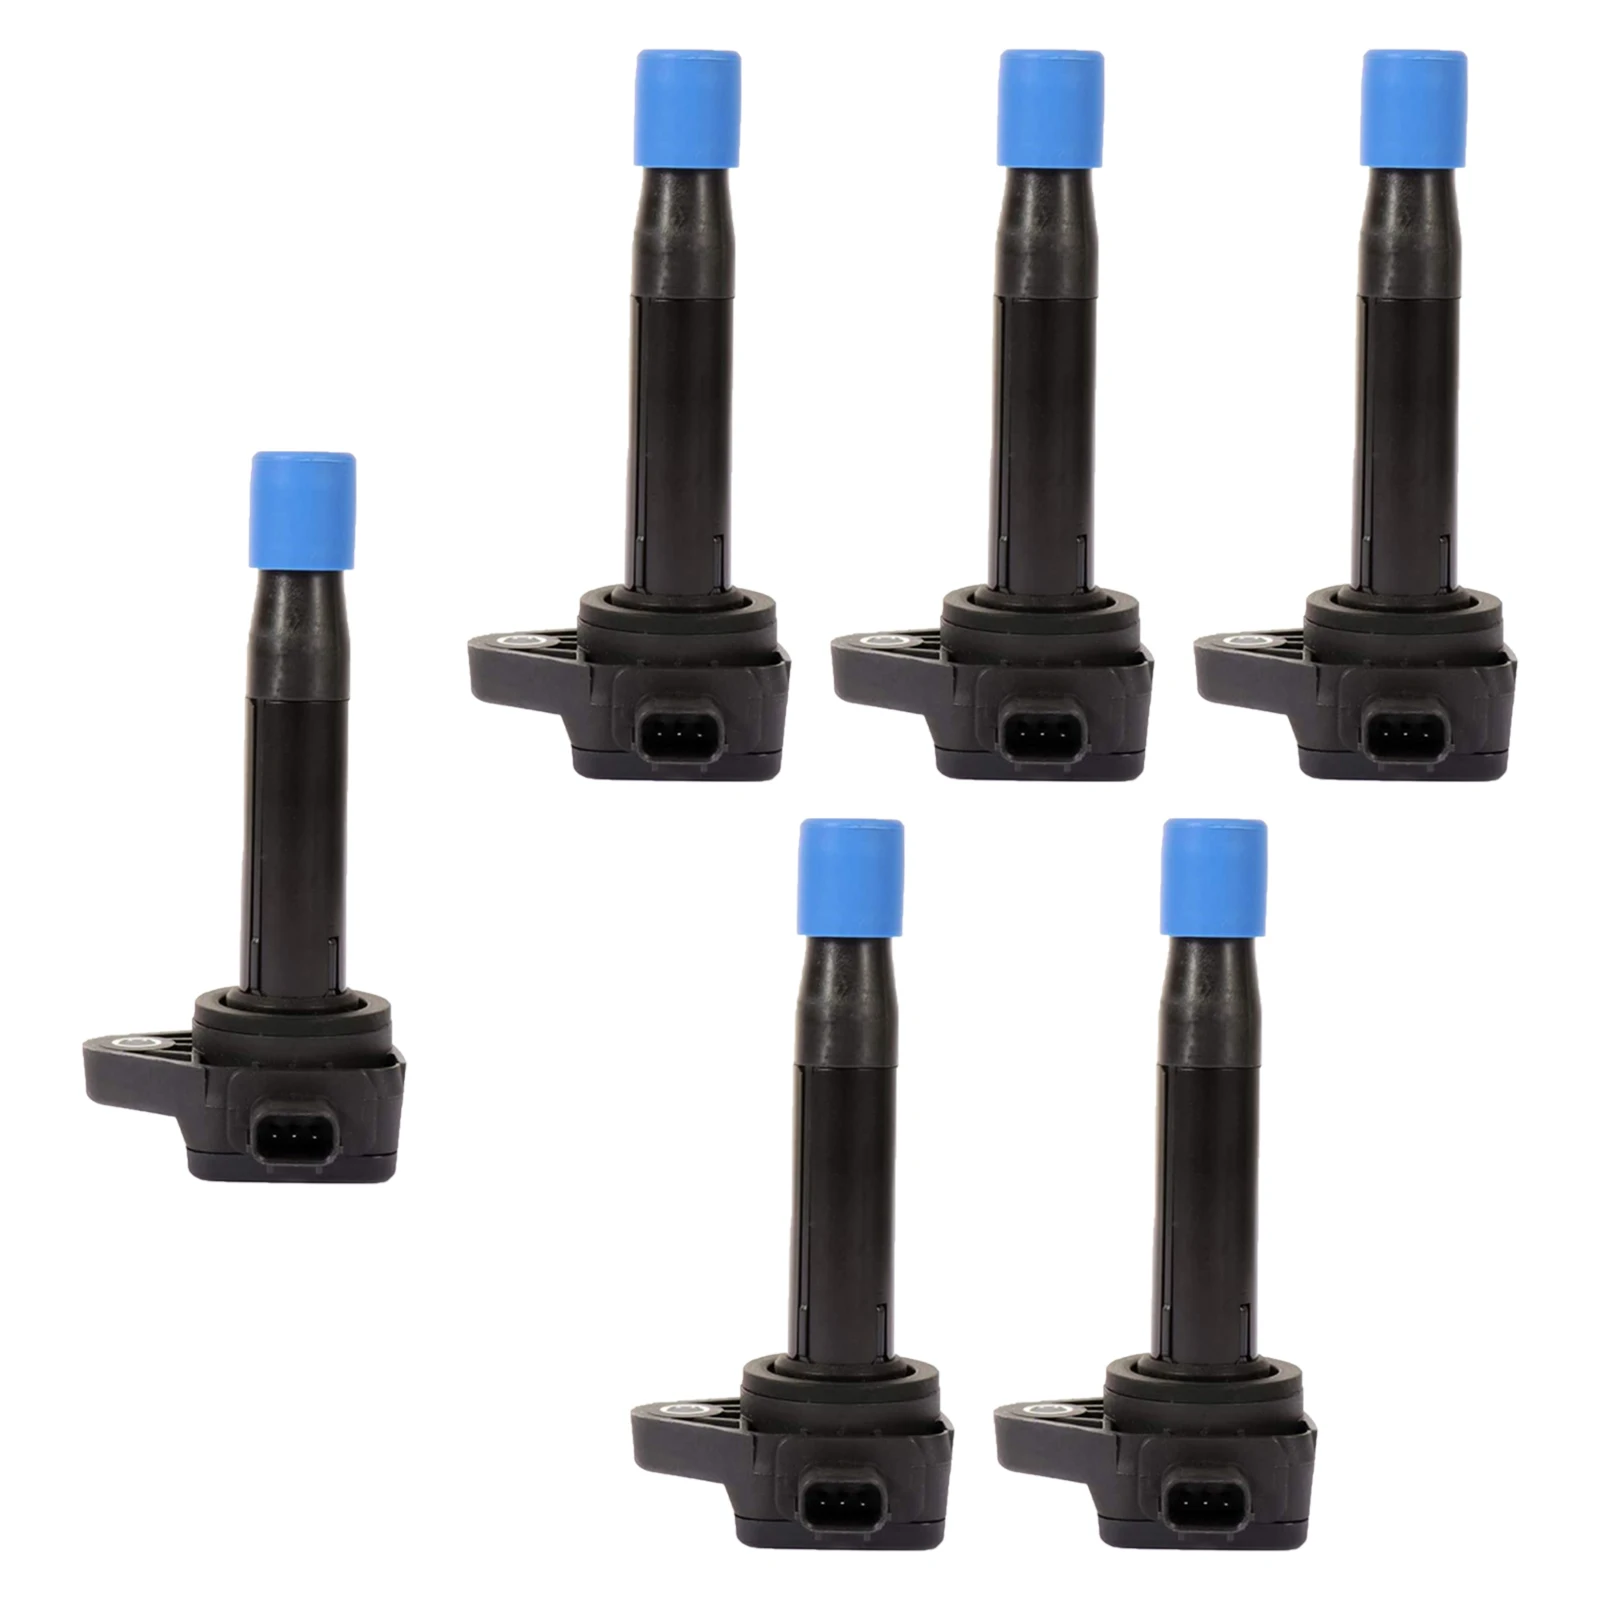  Car Ignition Coil Packs for Honda Accord 08-12 for Pilot 1788379 Set of 6